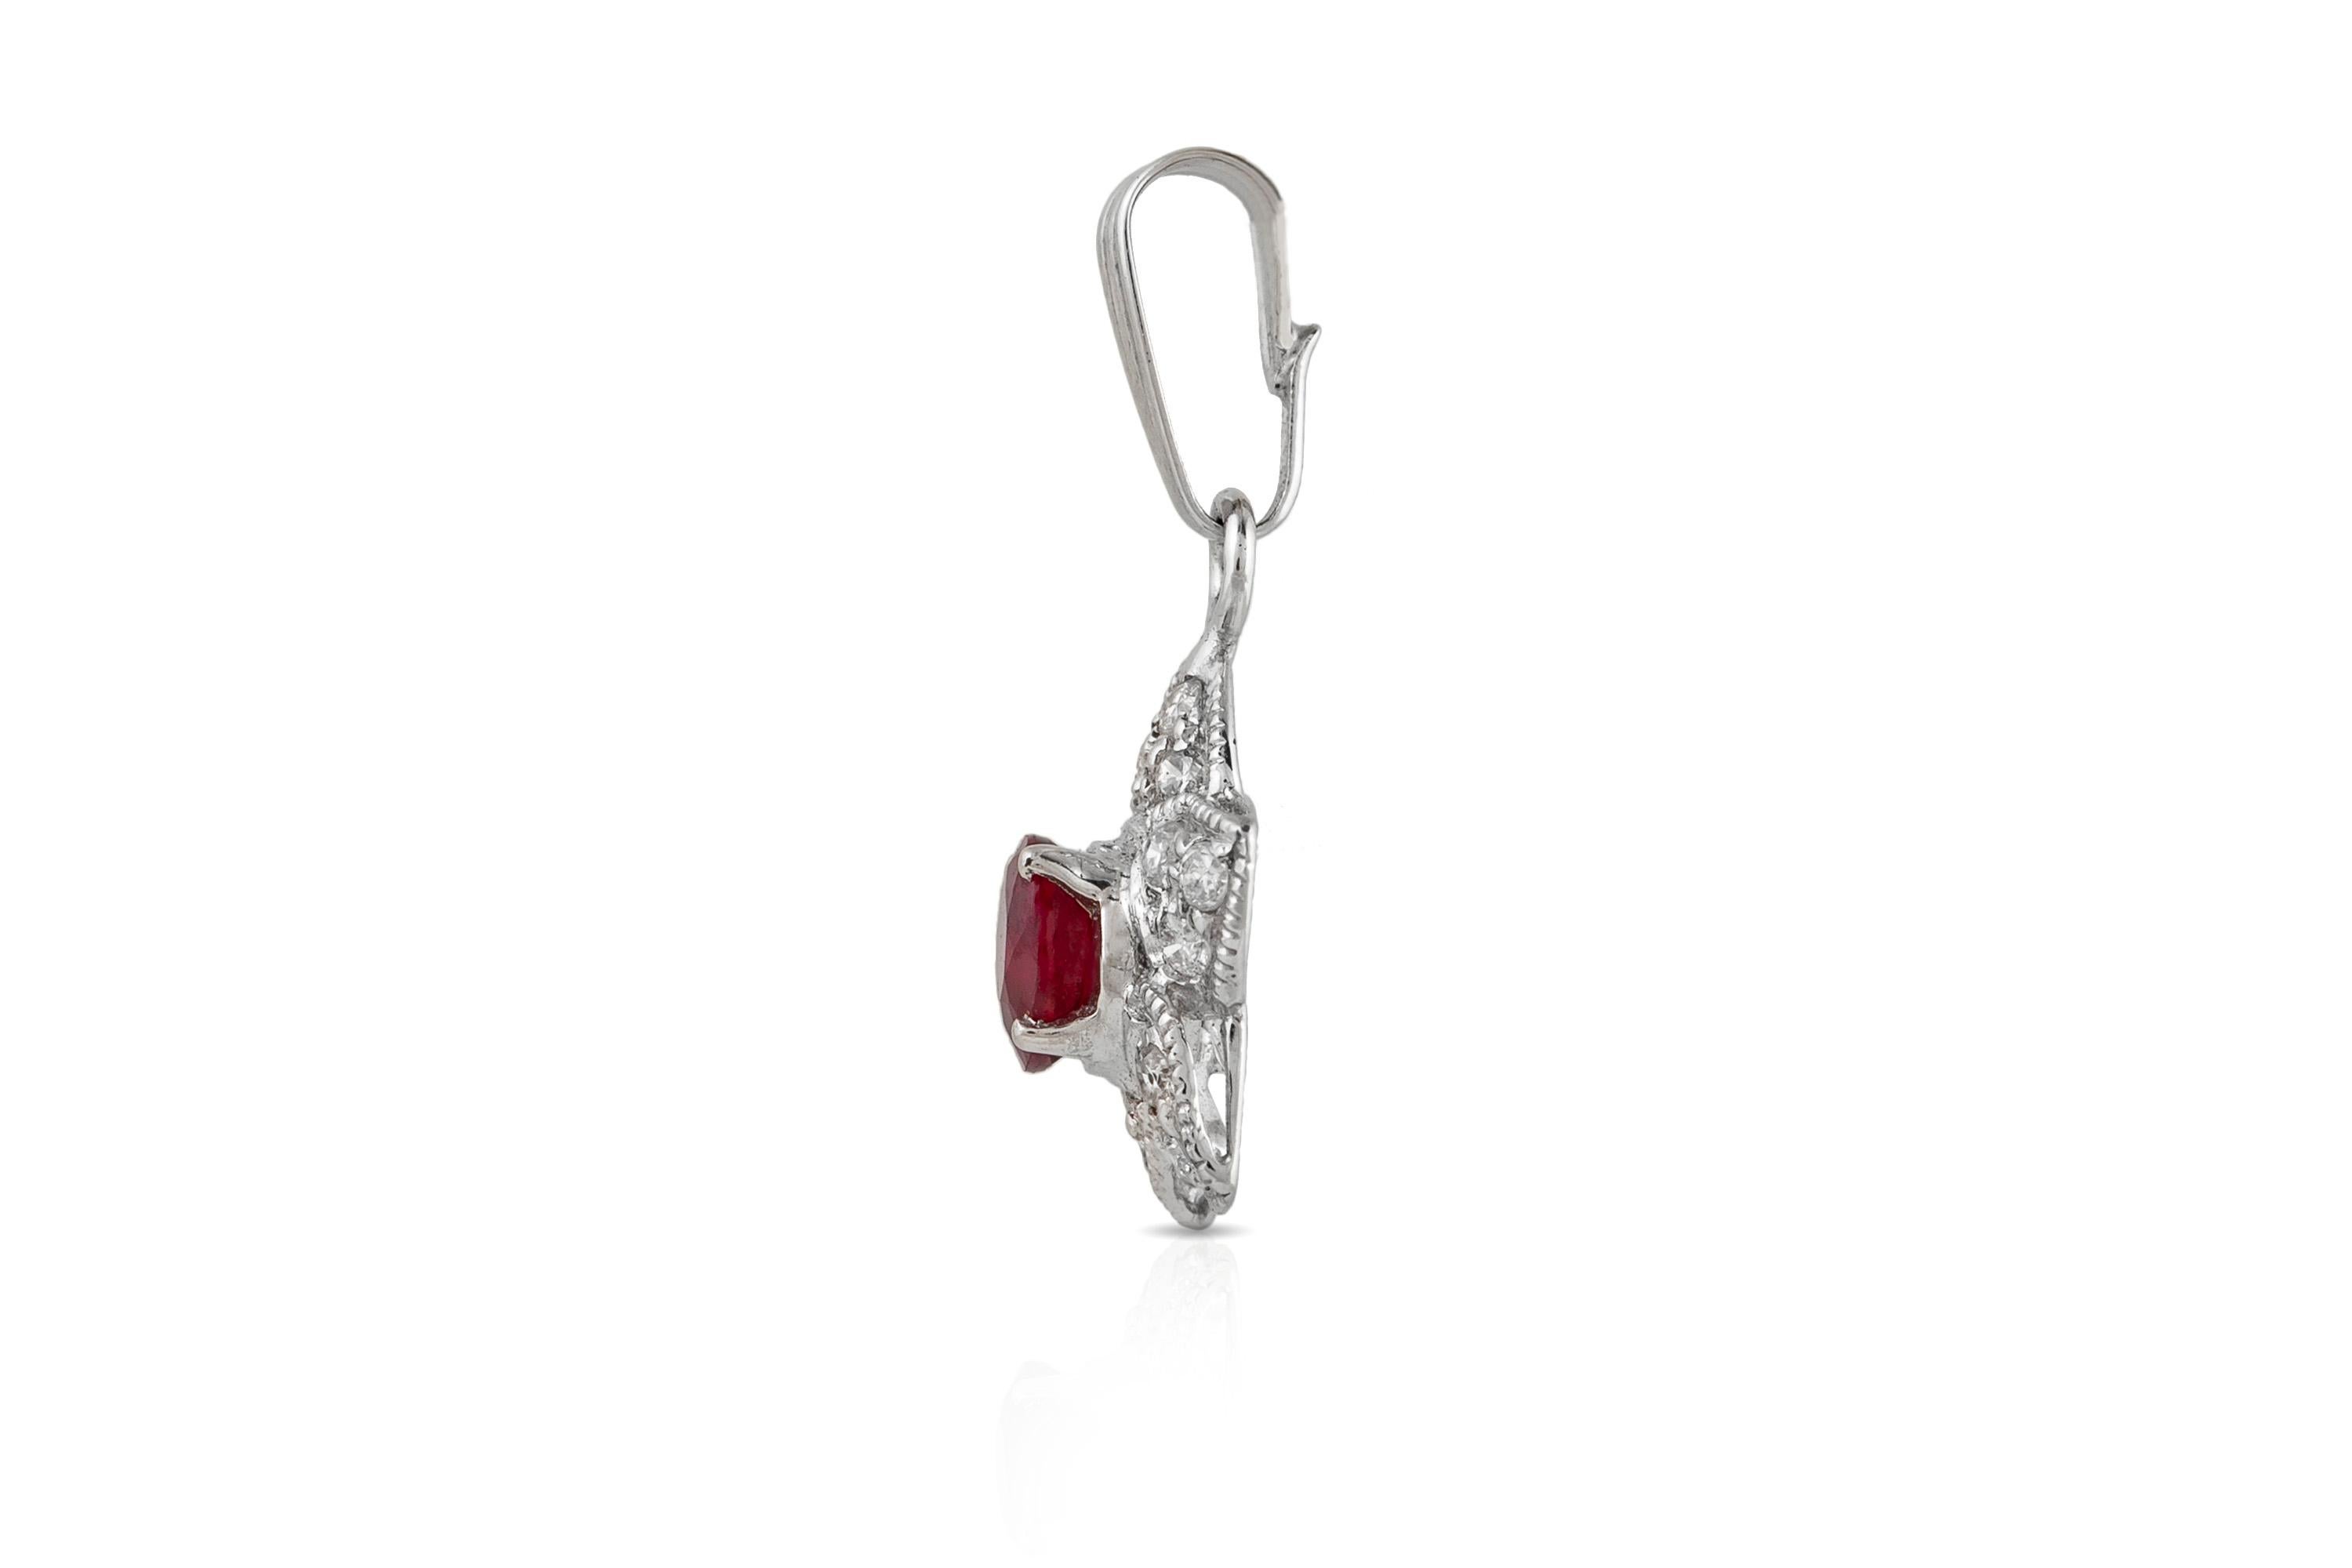 The pendant is finely crafted in 18k white gold with center ruby weighing approximately total of 0.45 carat and diamonds weighing approximately total of 0.14 carat.
Circa 1980.